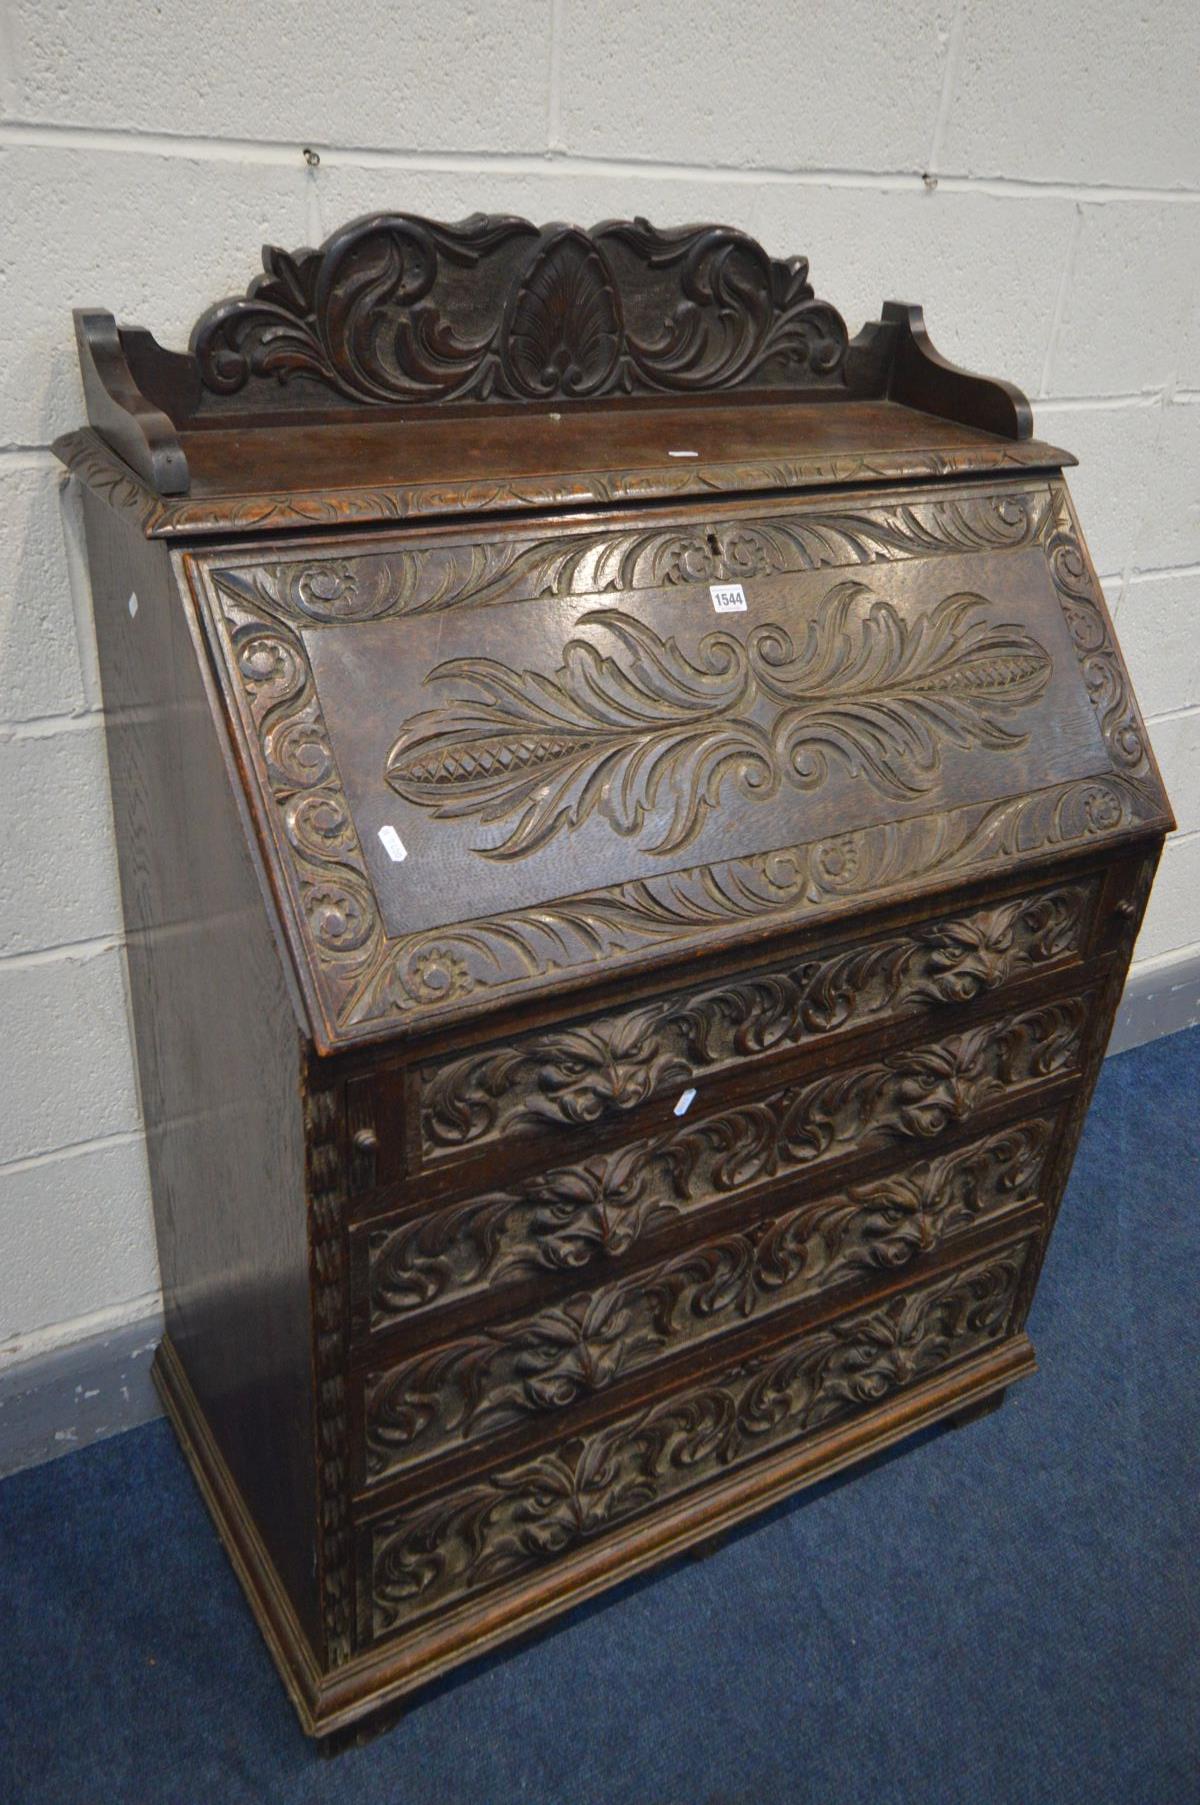 AN EARLY 20TH CENTURY CARVED OAK BUREAU, gallery top, the fall front with a fitted interior, above